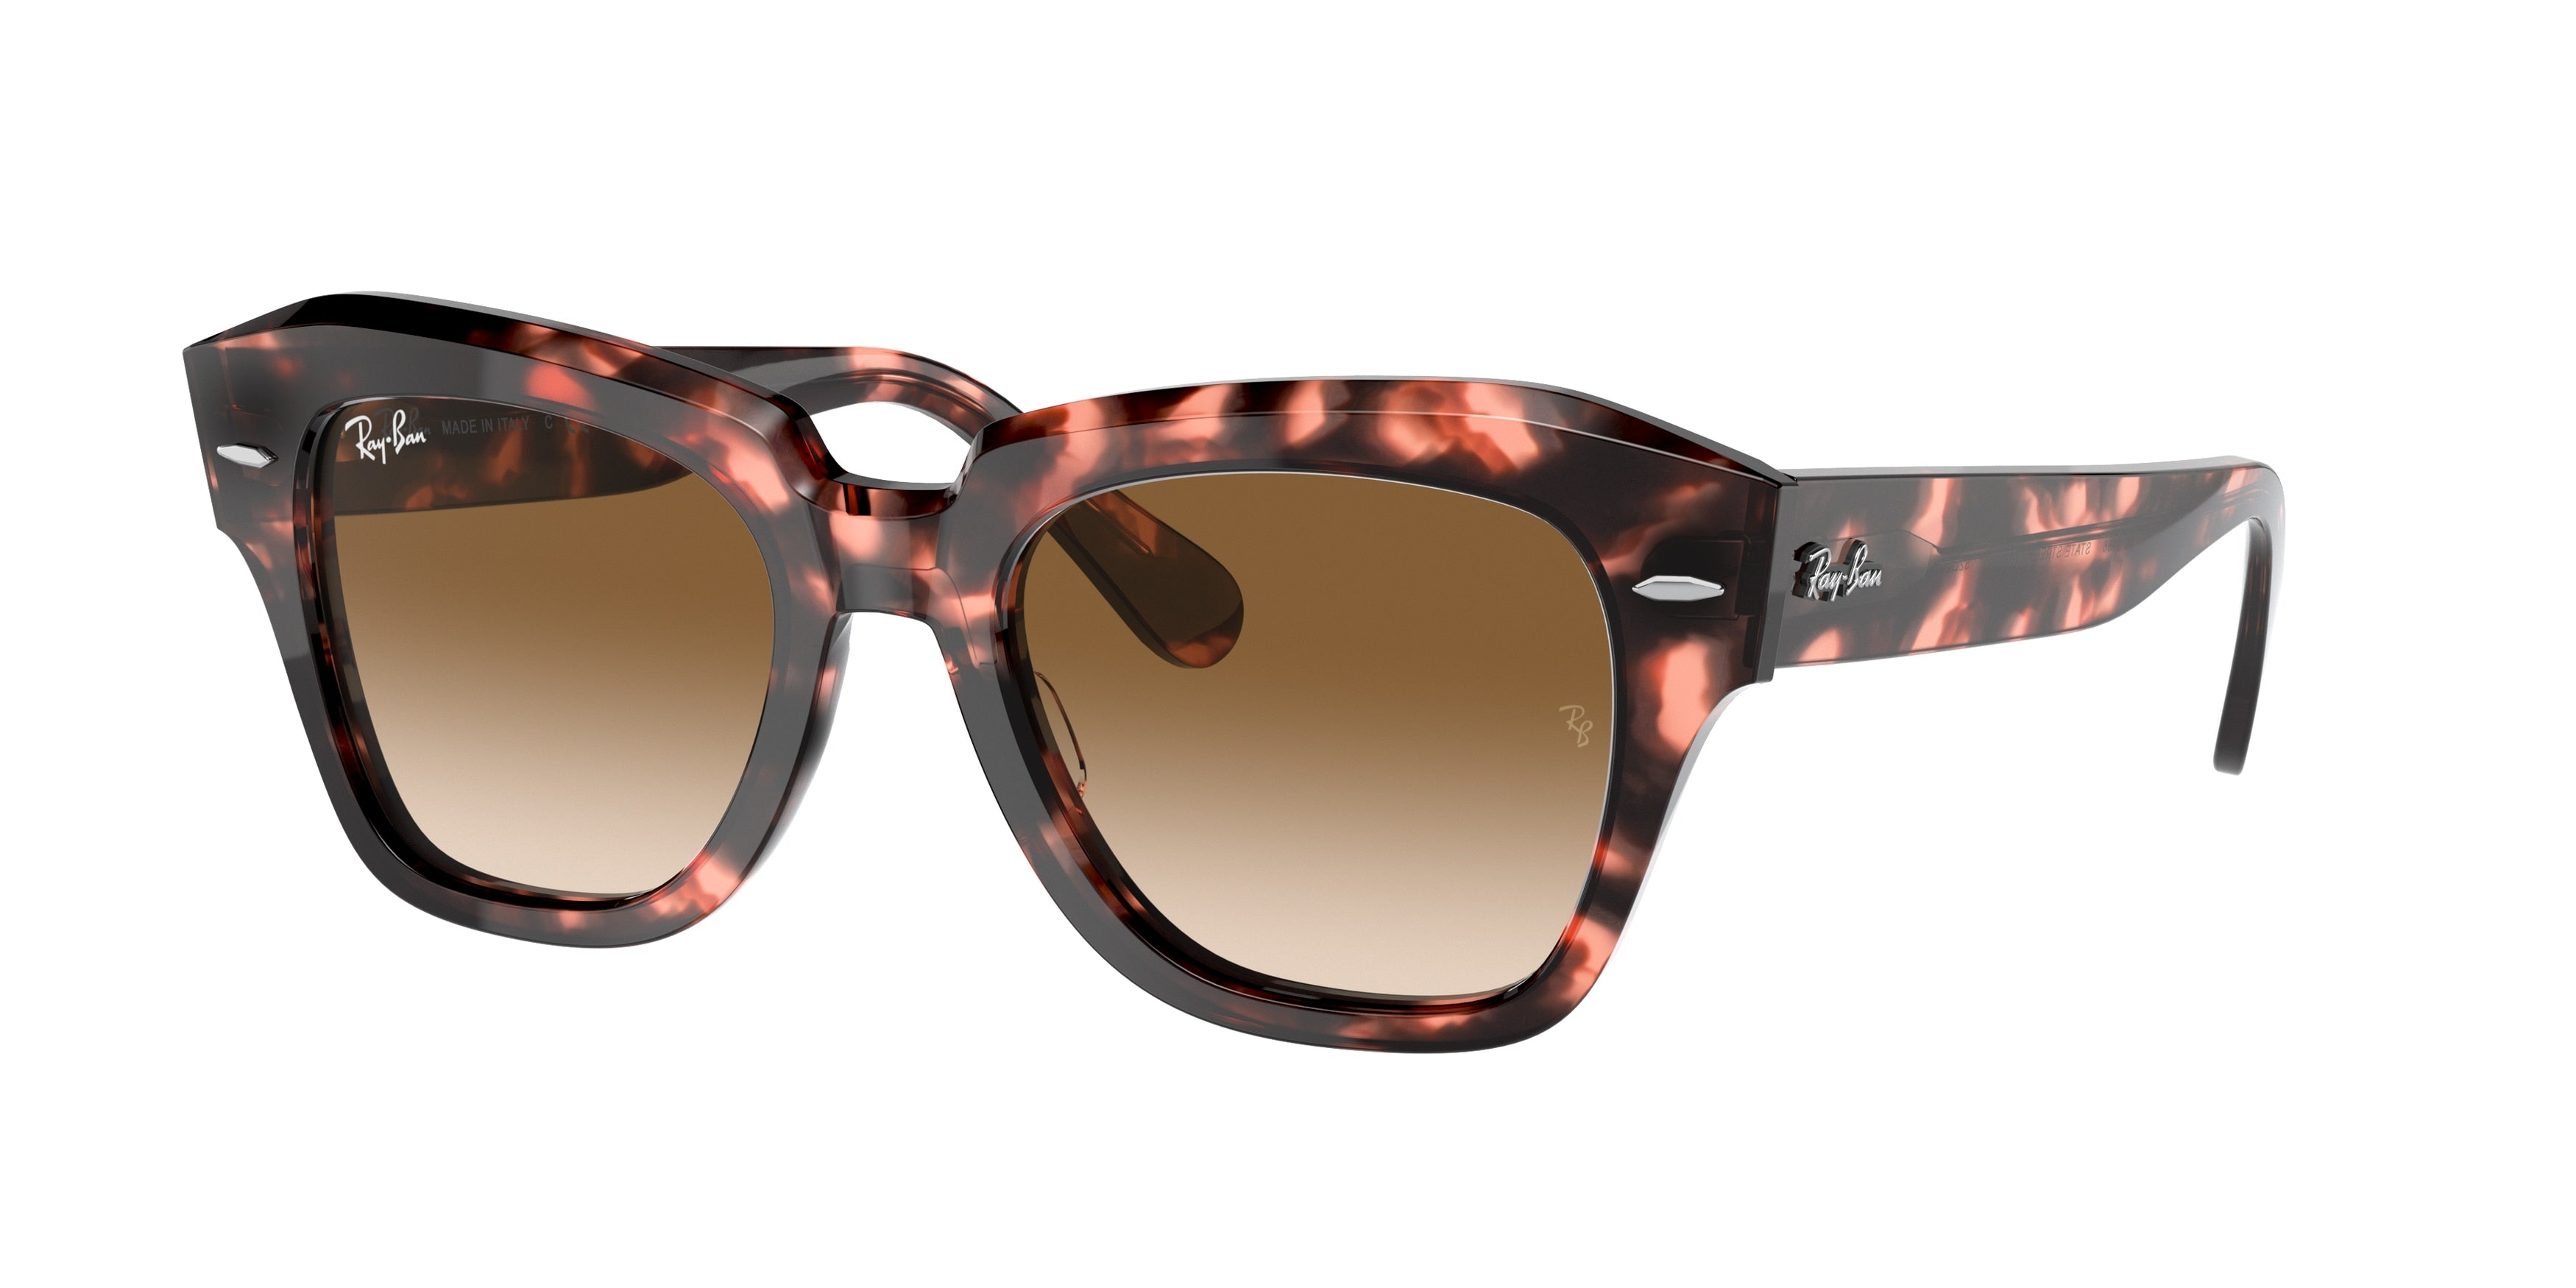 Ray-Ban STATE STREET RB2186 Square Sunglasses  133451-Pink Havana 52-145-20 - Color Map Pink